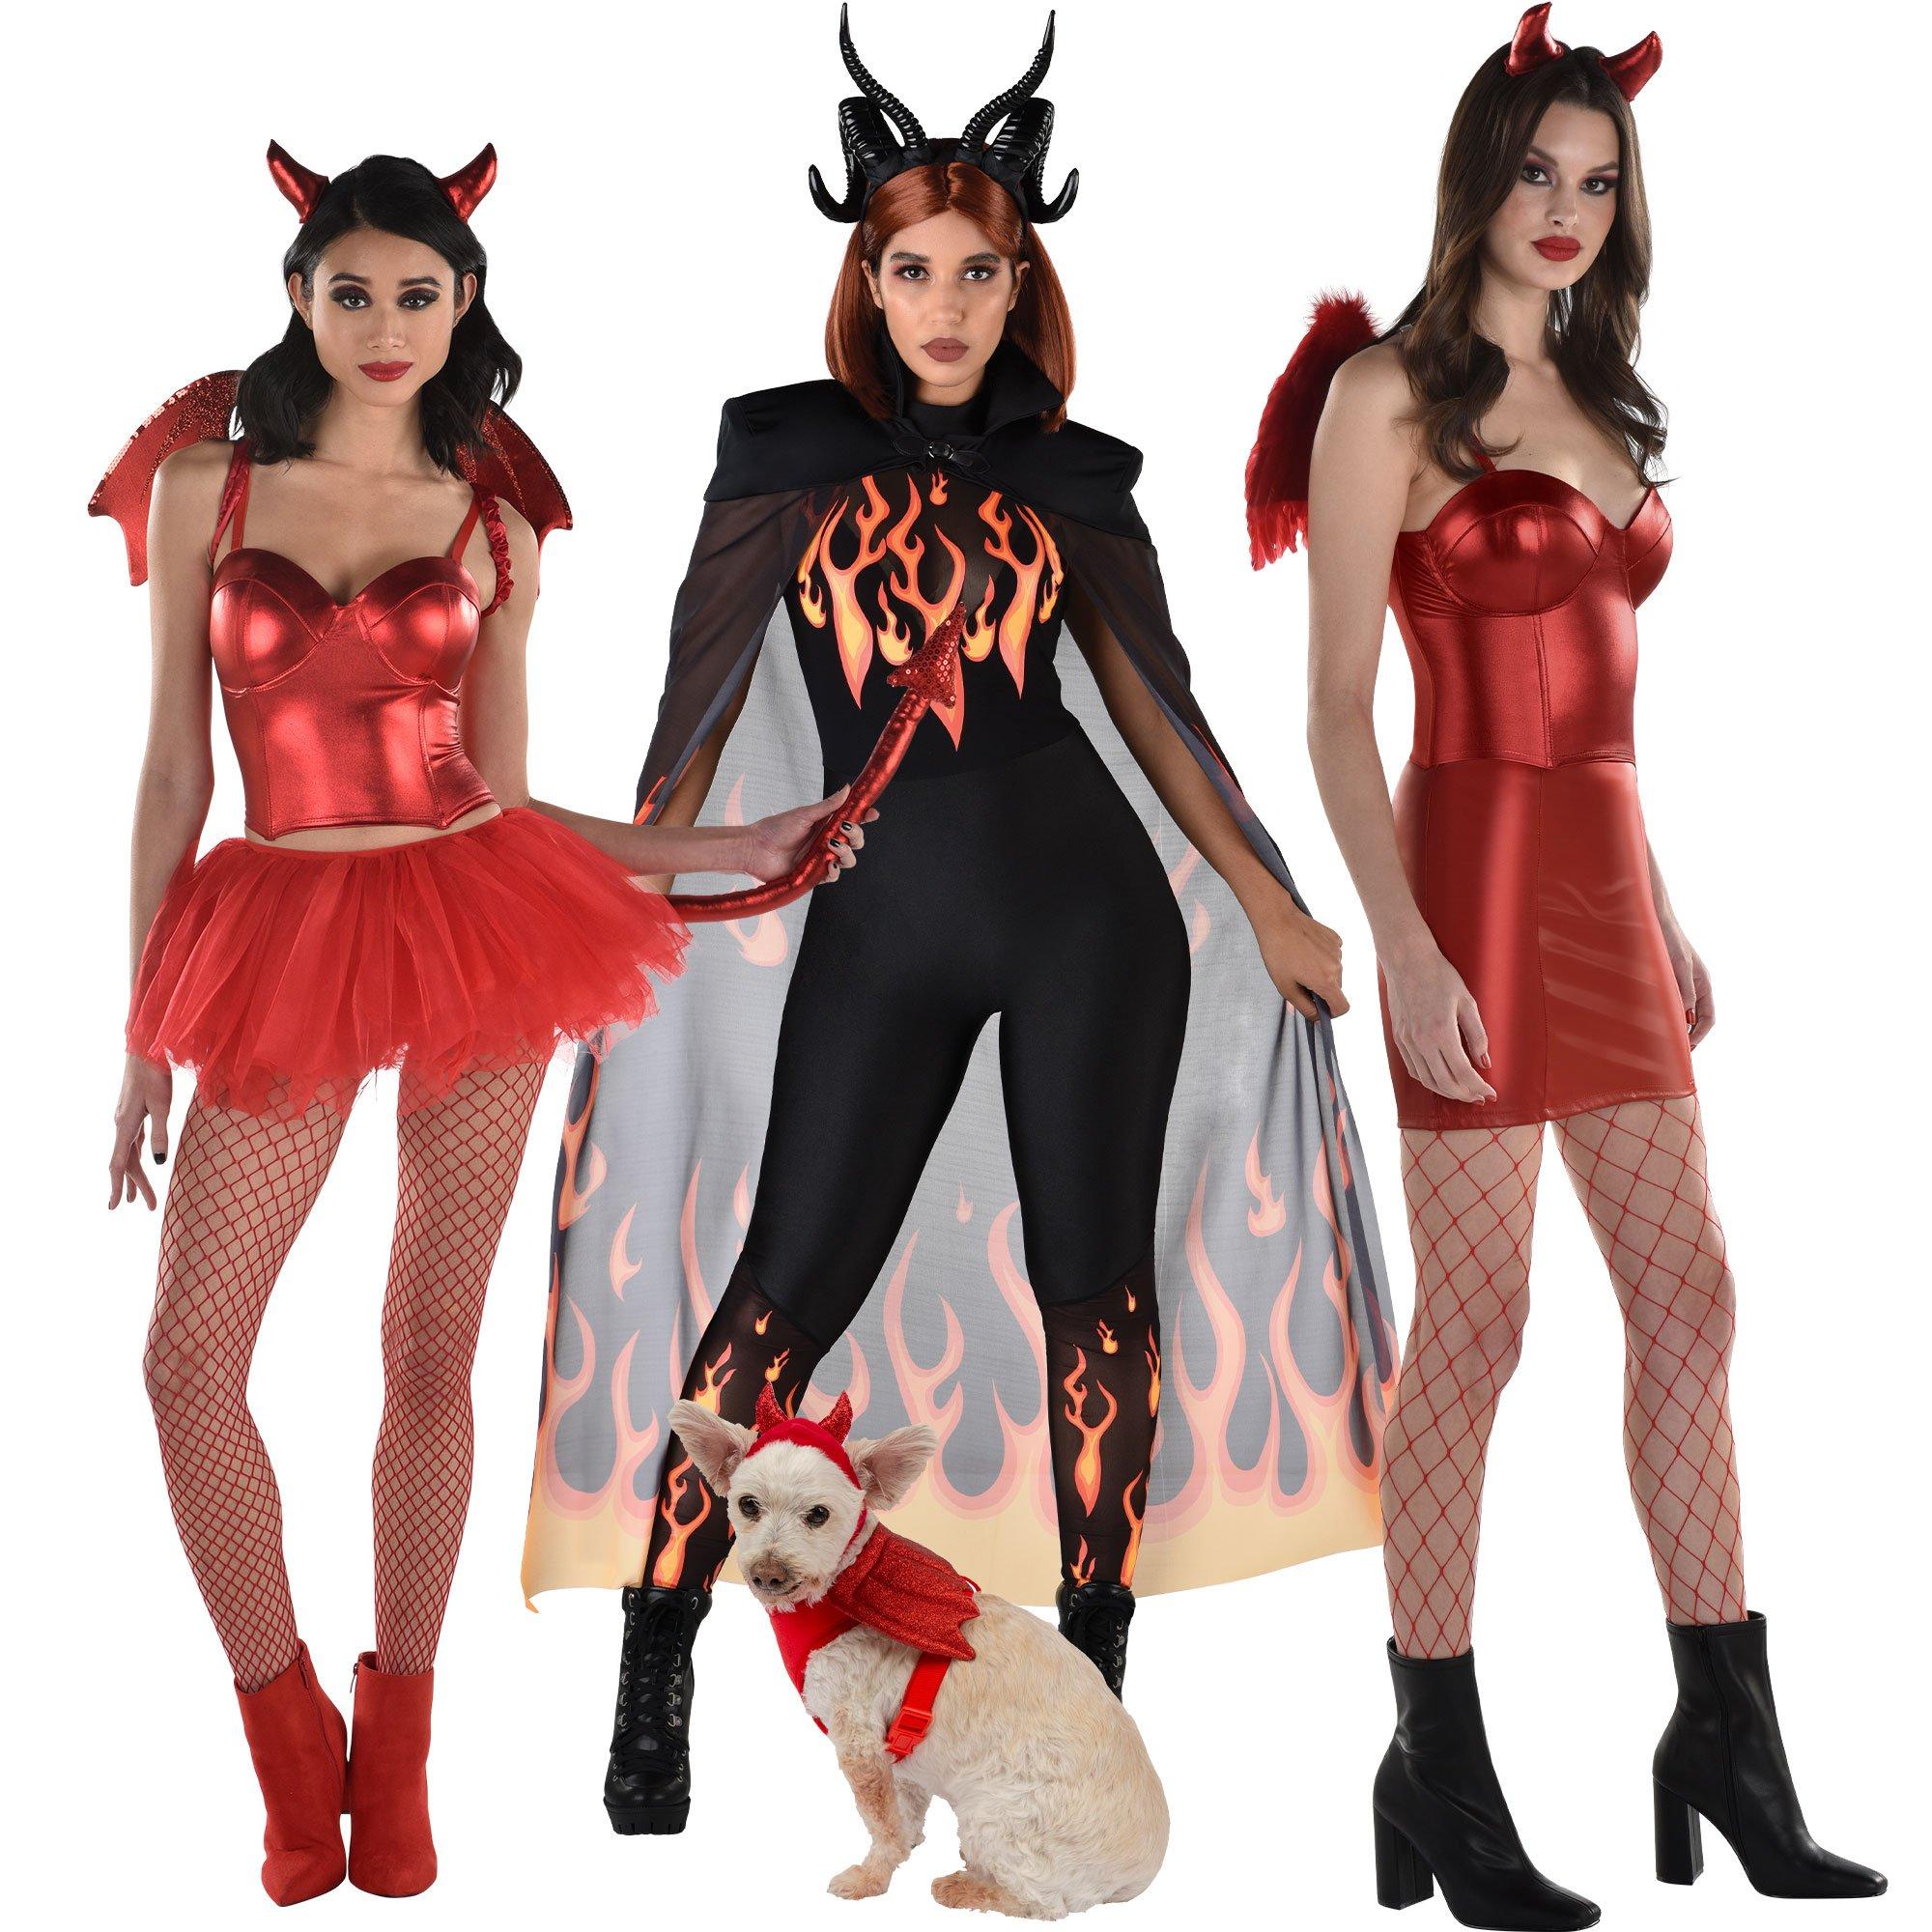 Wayne NJ Party Store for Halloween Costumes & Party Supplies - Party City  Brentwood Plaza Shopping Center